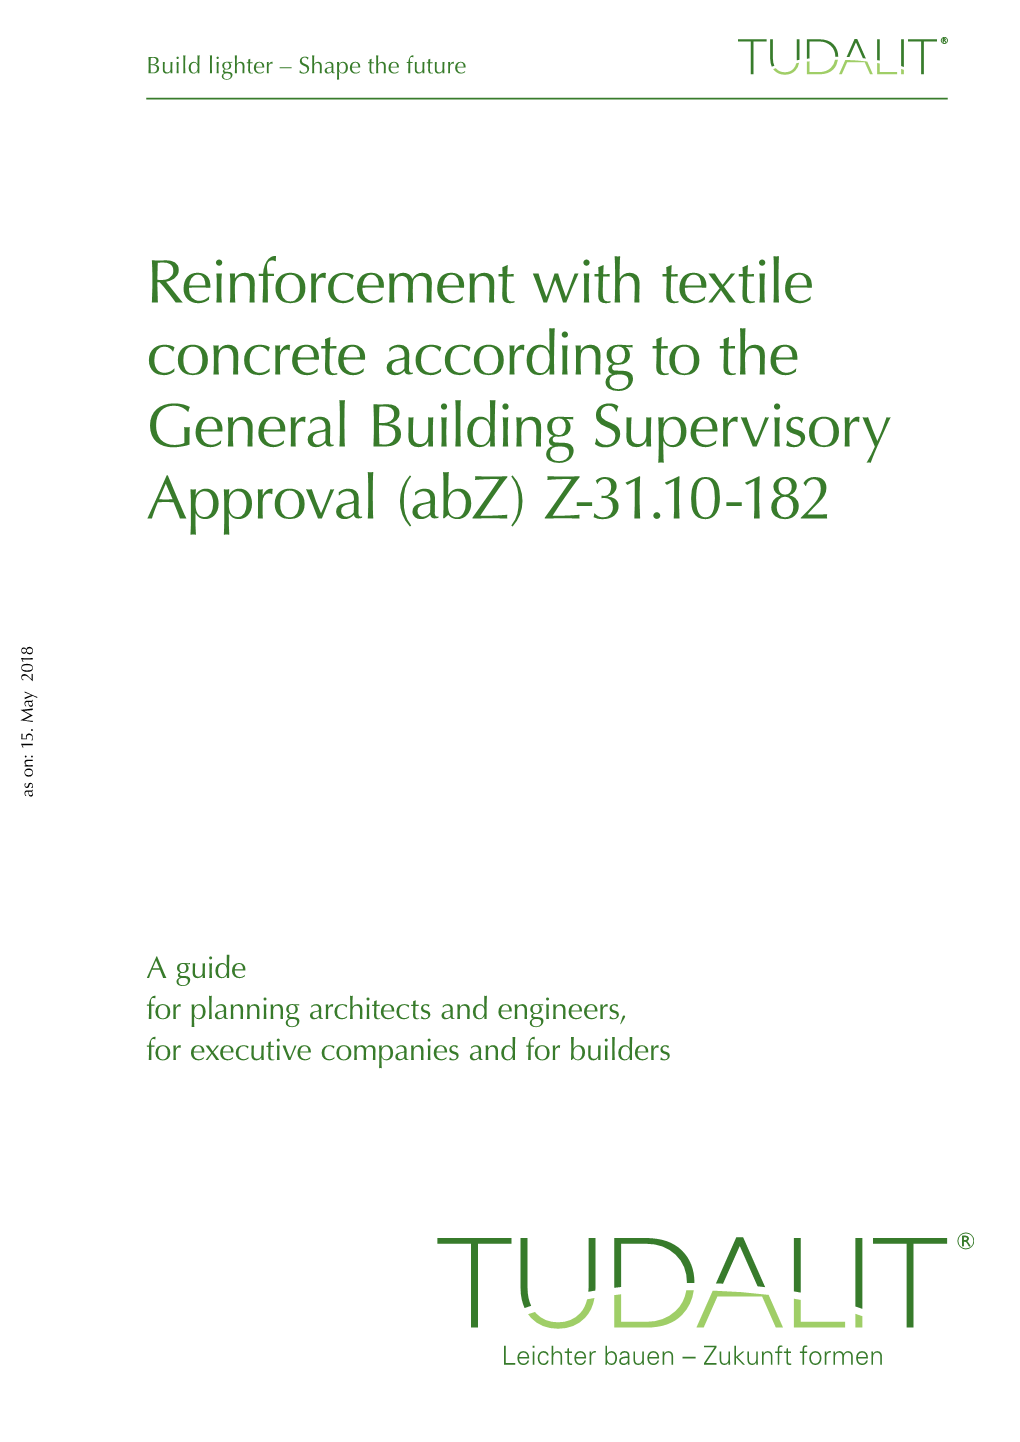 Reinforcement with Textile Concrete According to the General Building Supervisory Approval (Abz) Z-31.10-182 As On: 15